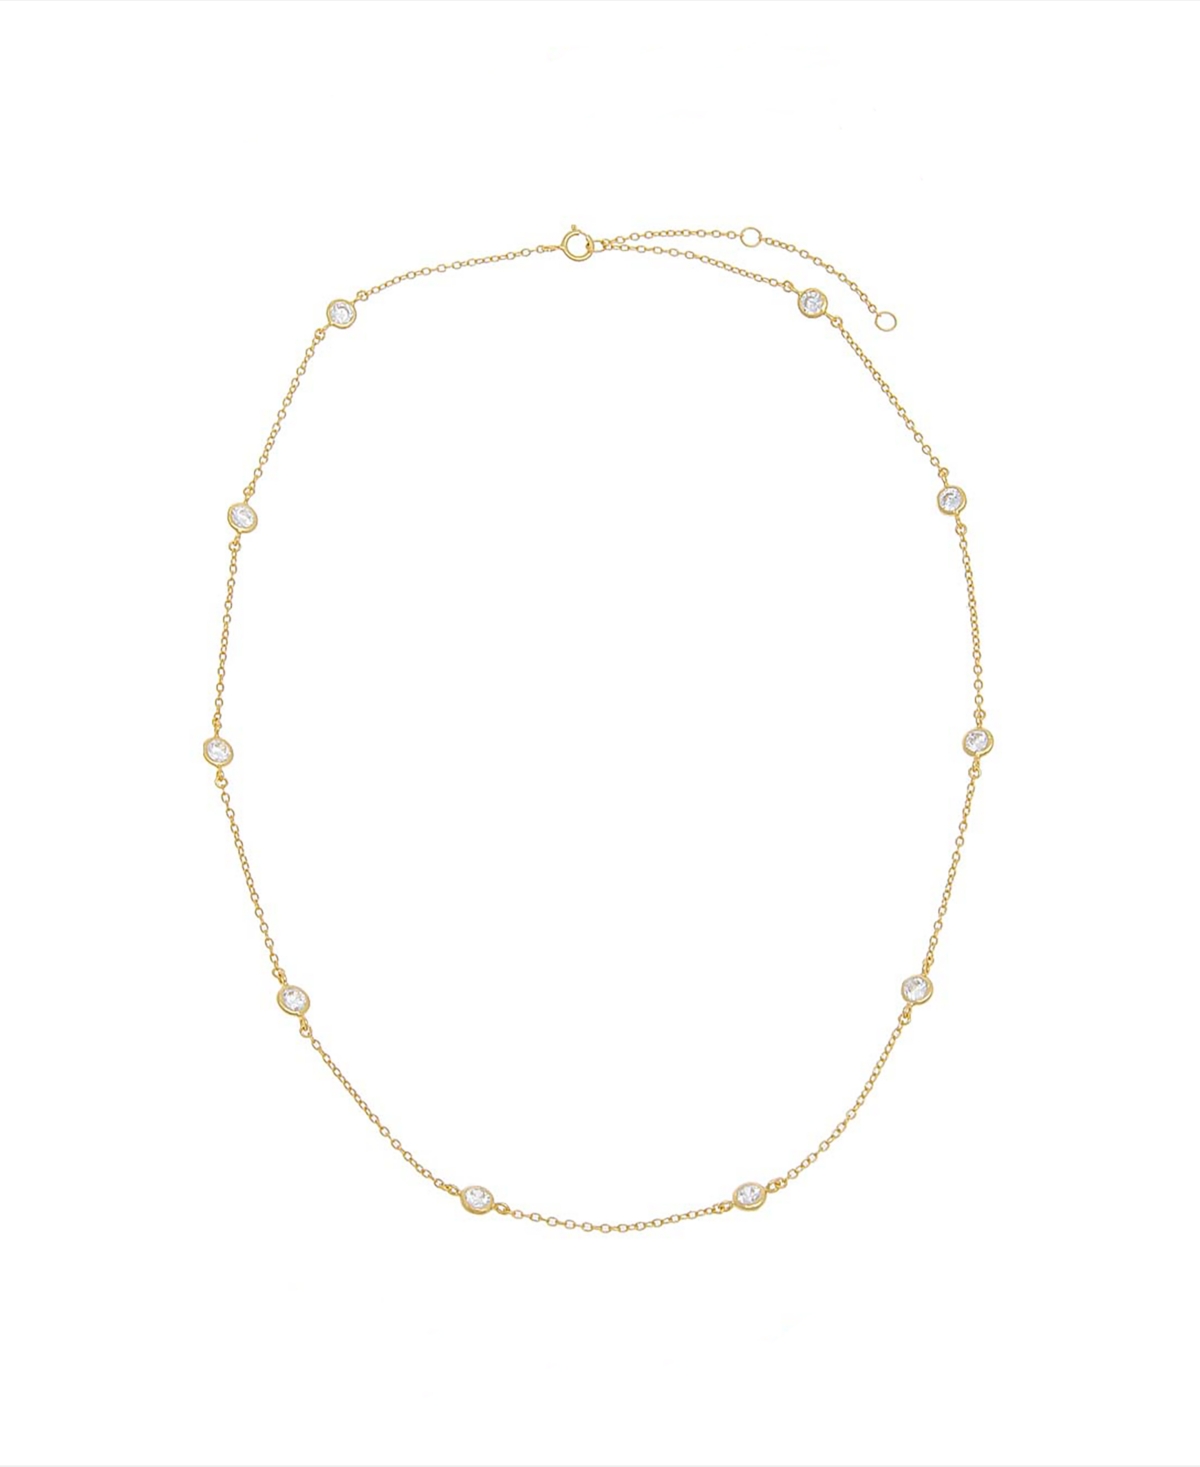 By Adina Eden The Yard Necklace In Gold-plated